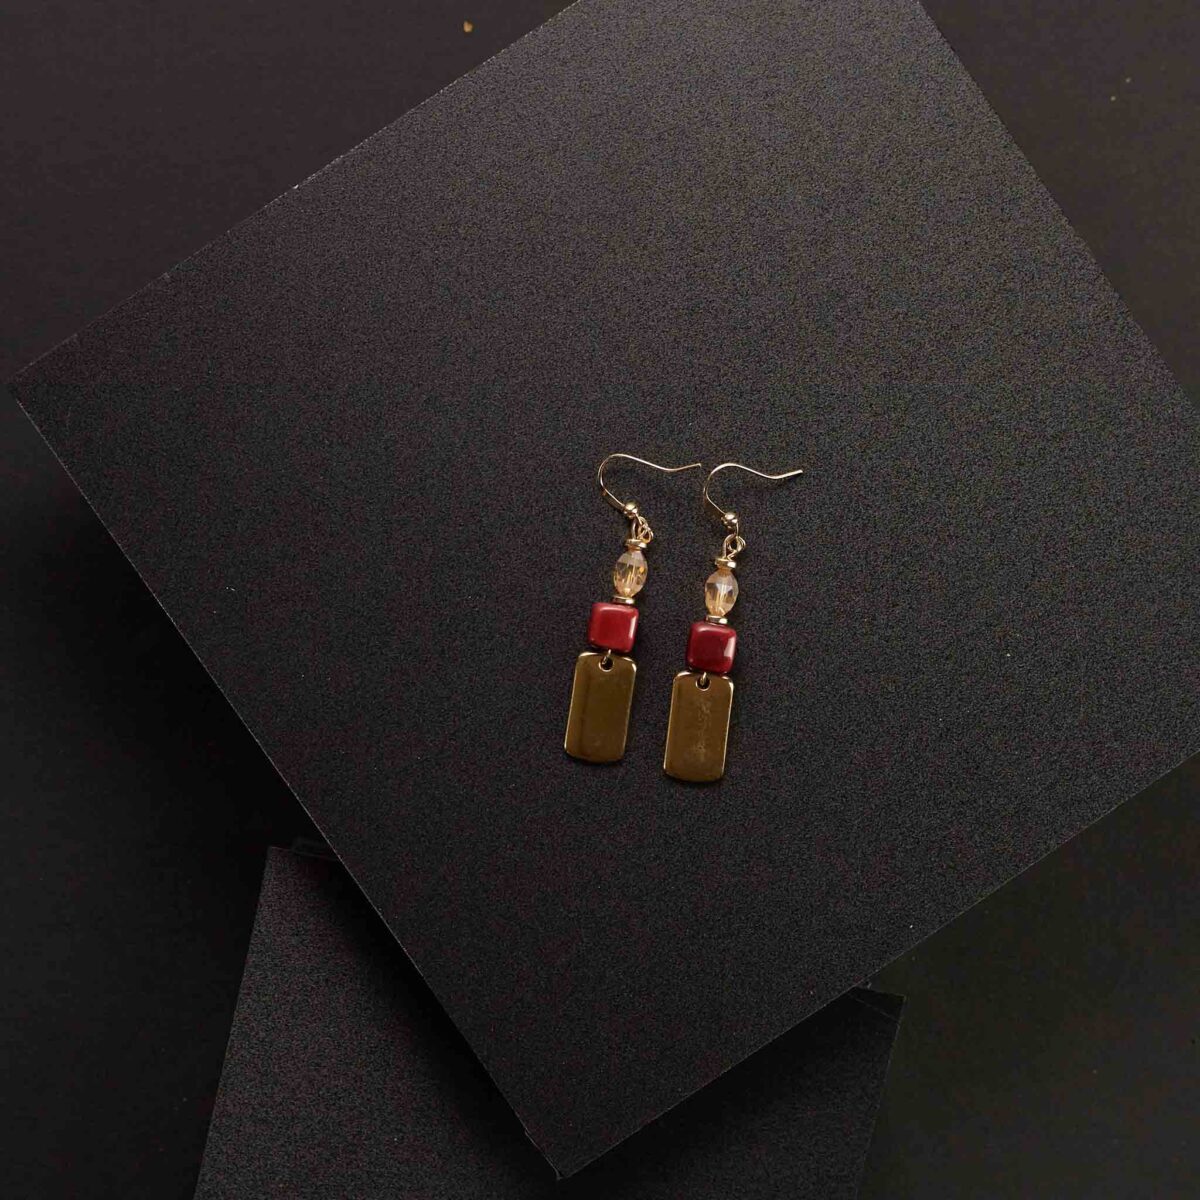 Gold Plated Metal Earrings with Red Dice